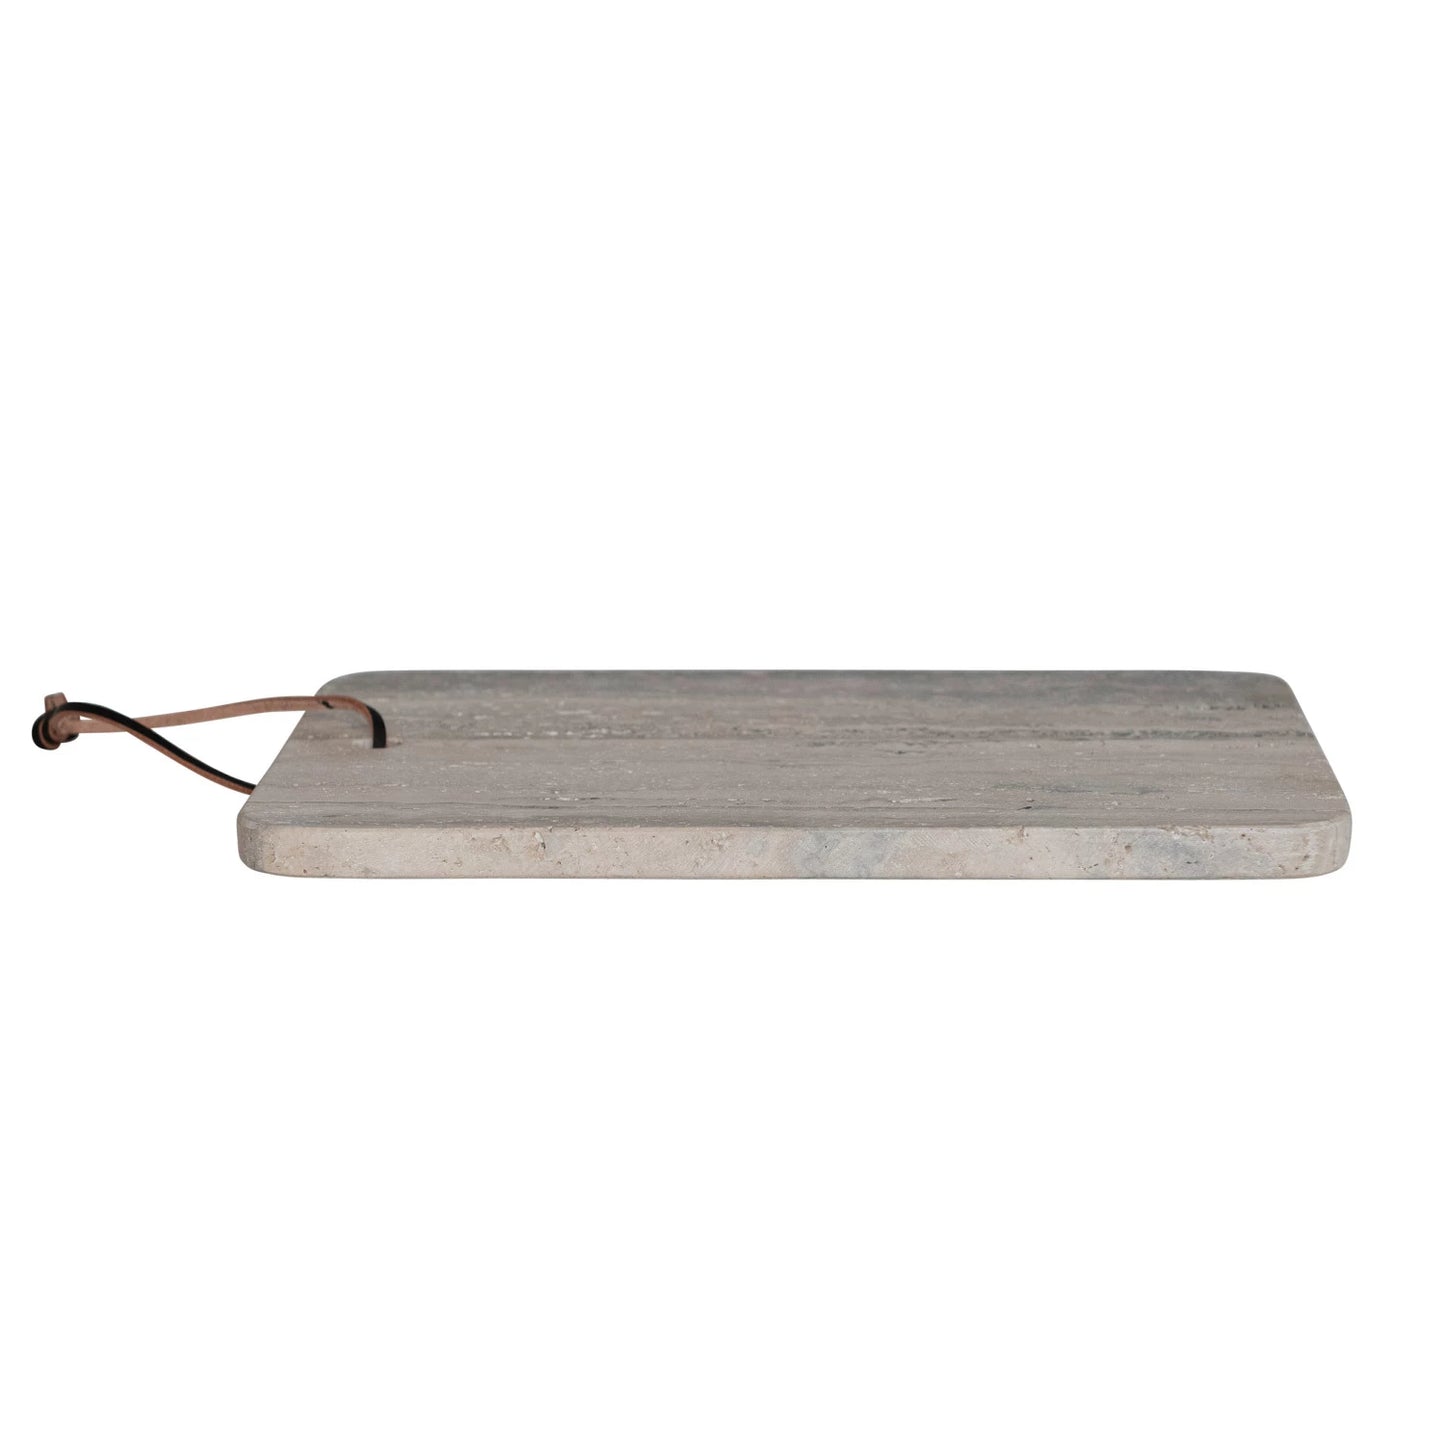 Tavertine Cheese/Cutting Board with Leather Tie - Natural